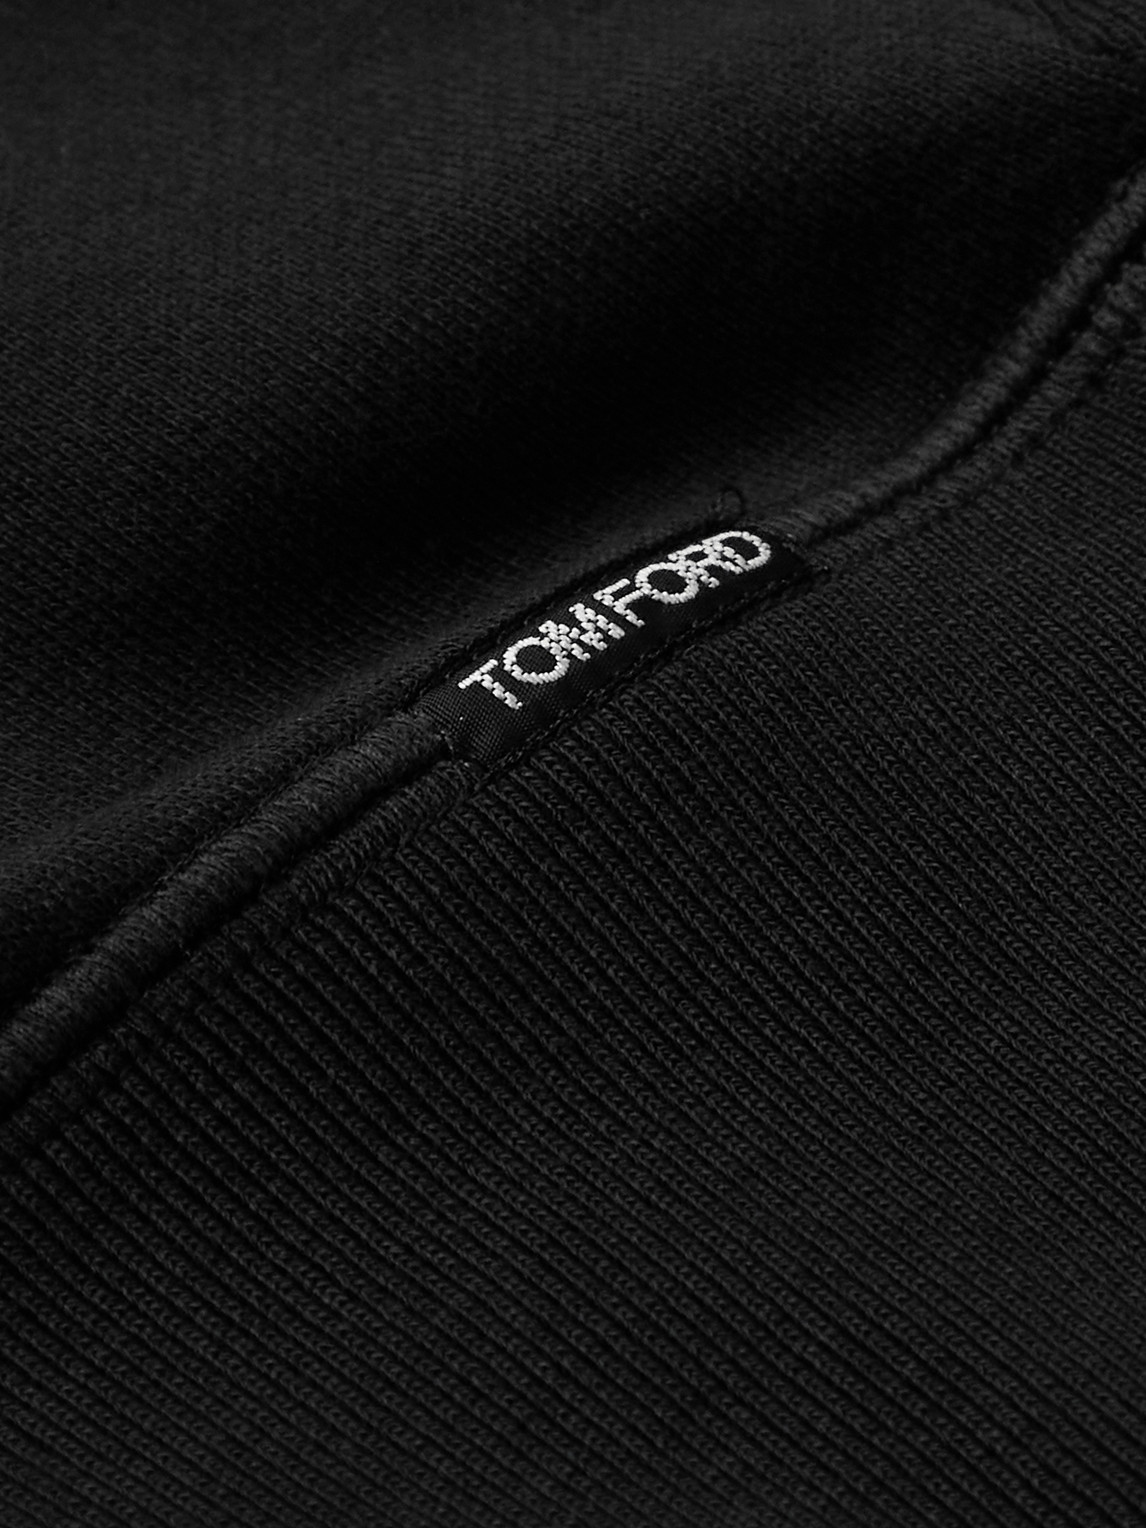 Shop Tom Ford Garment-dyed Cotton-jersey Hoodie In Black